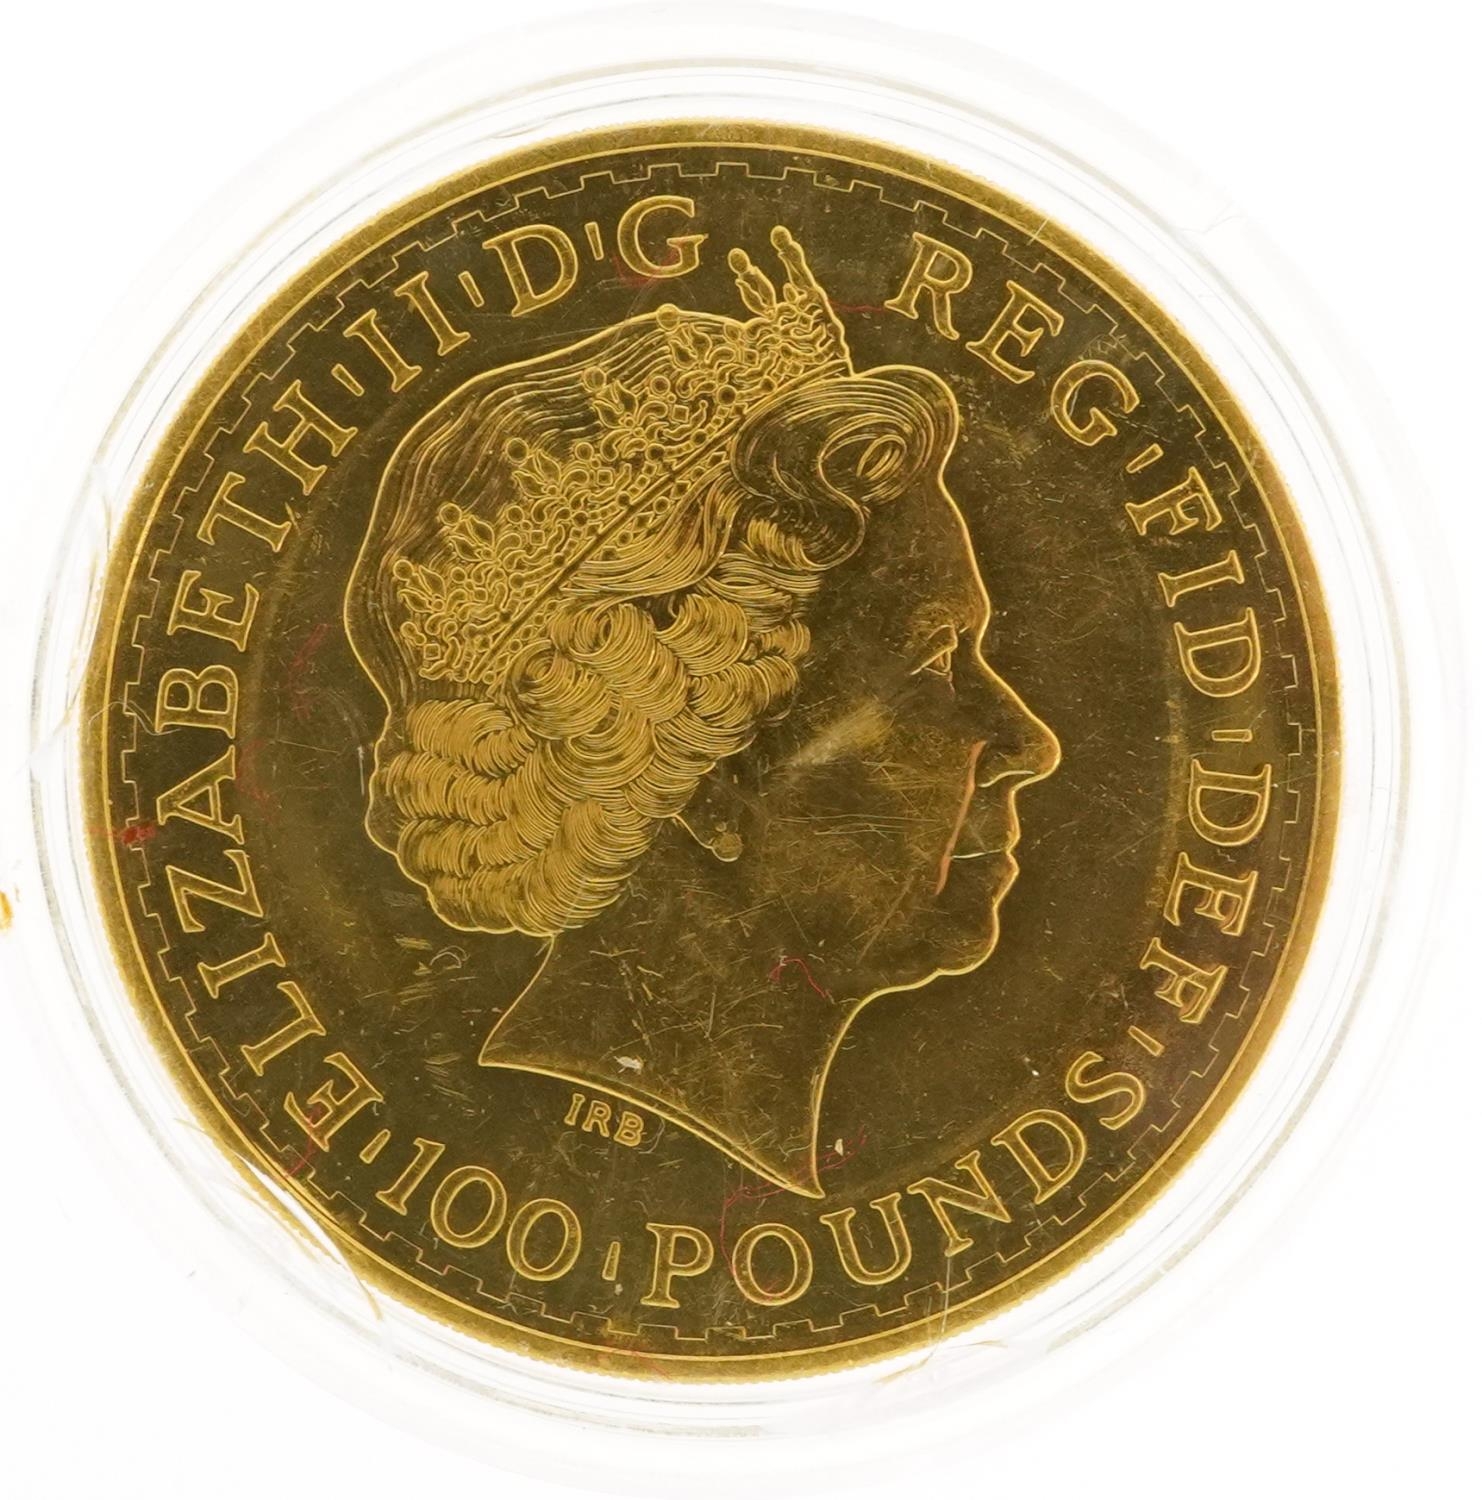 Elizabeth II 2013 Britannia one ounce fine gold one hundred pound coin - Image 2 of 2